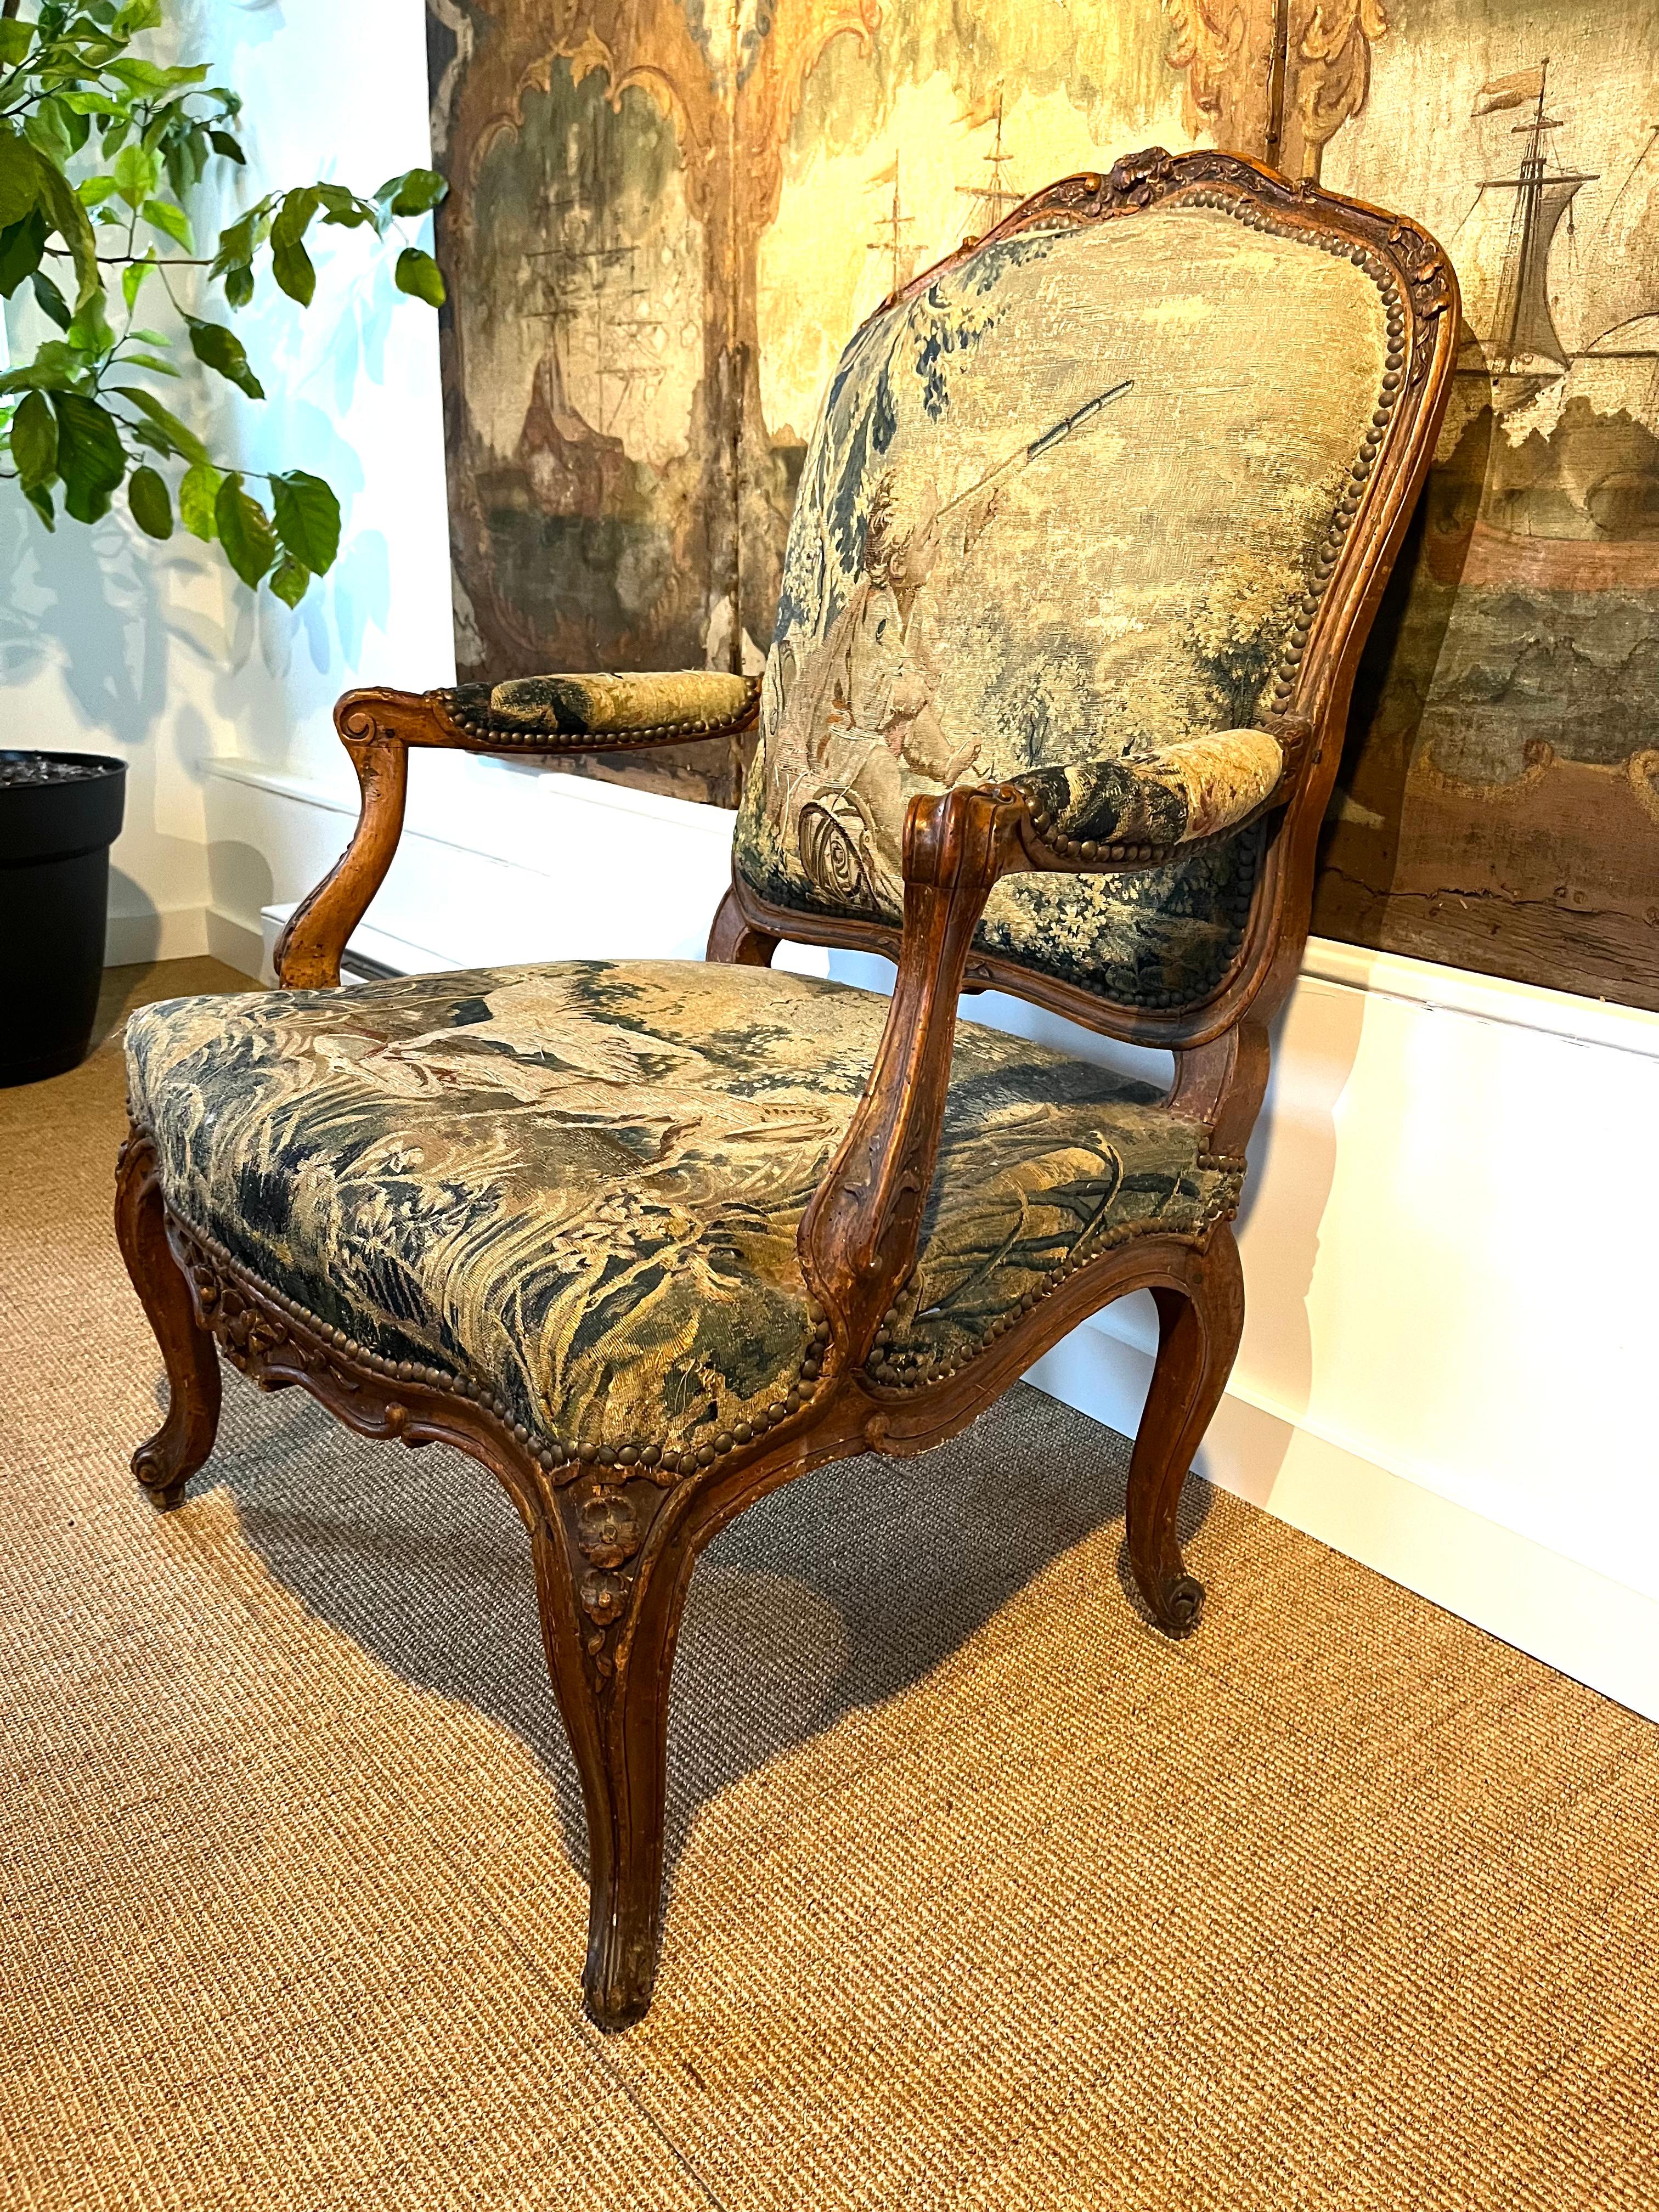 A fine Louis XV period fauteuil a la reine, stamped under seat rail “G.LEBRUN”, circa 1760, upholstered in its original Aubusson verdue tapestry depiction a child with a telescope and various animals, the frame in carved and stained beech. Nice